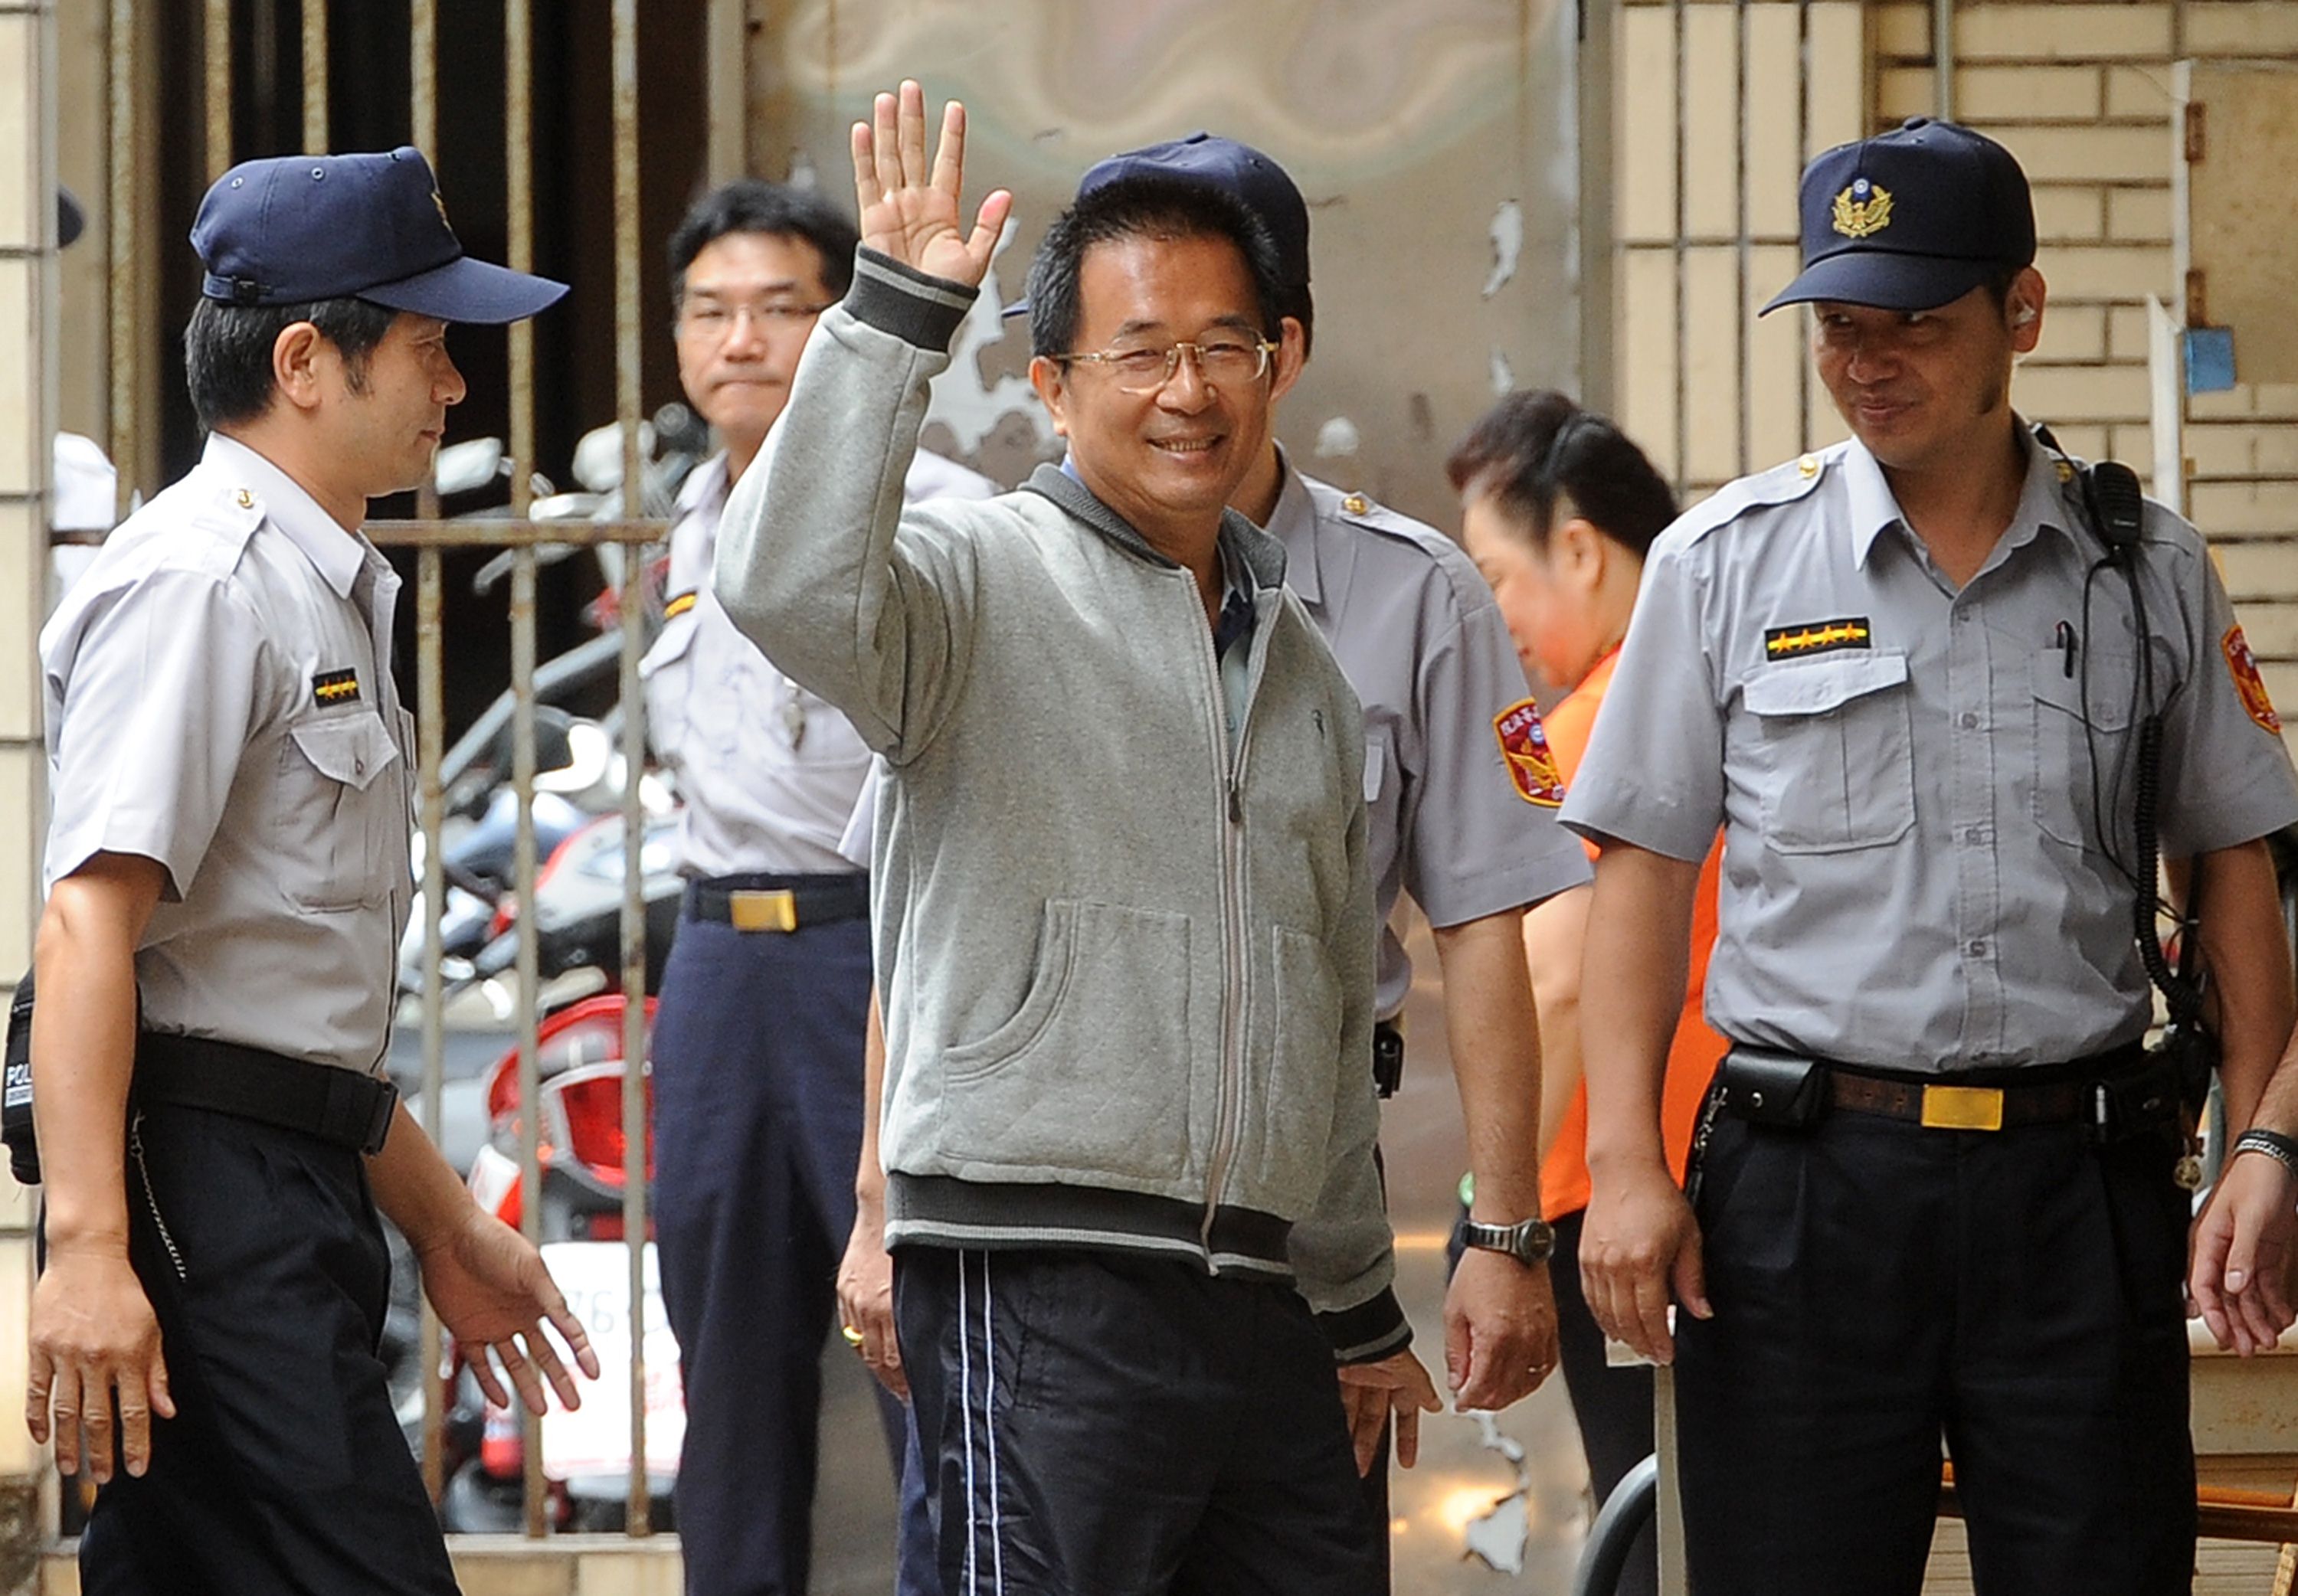 Former Taiwanese president Chen Shui-bian, pictured in 2011, has been serving a 20-year jail term for corruption since November 2010. Photo: AFP